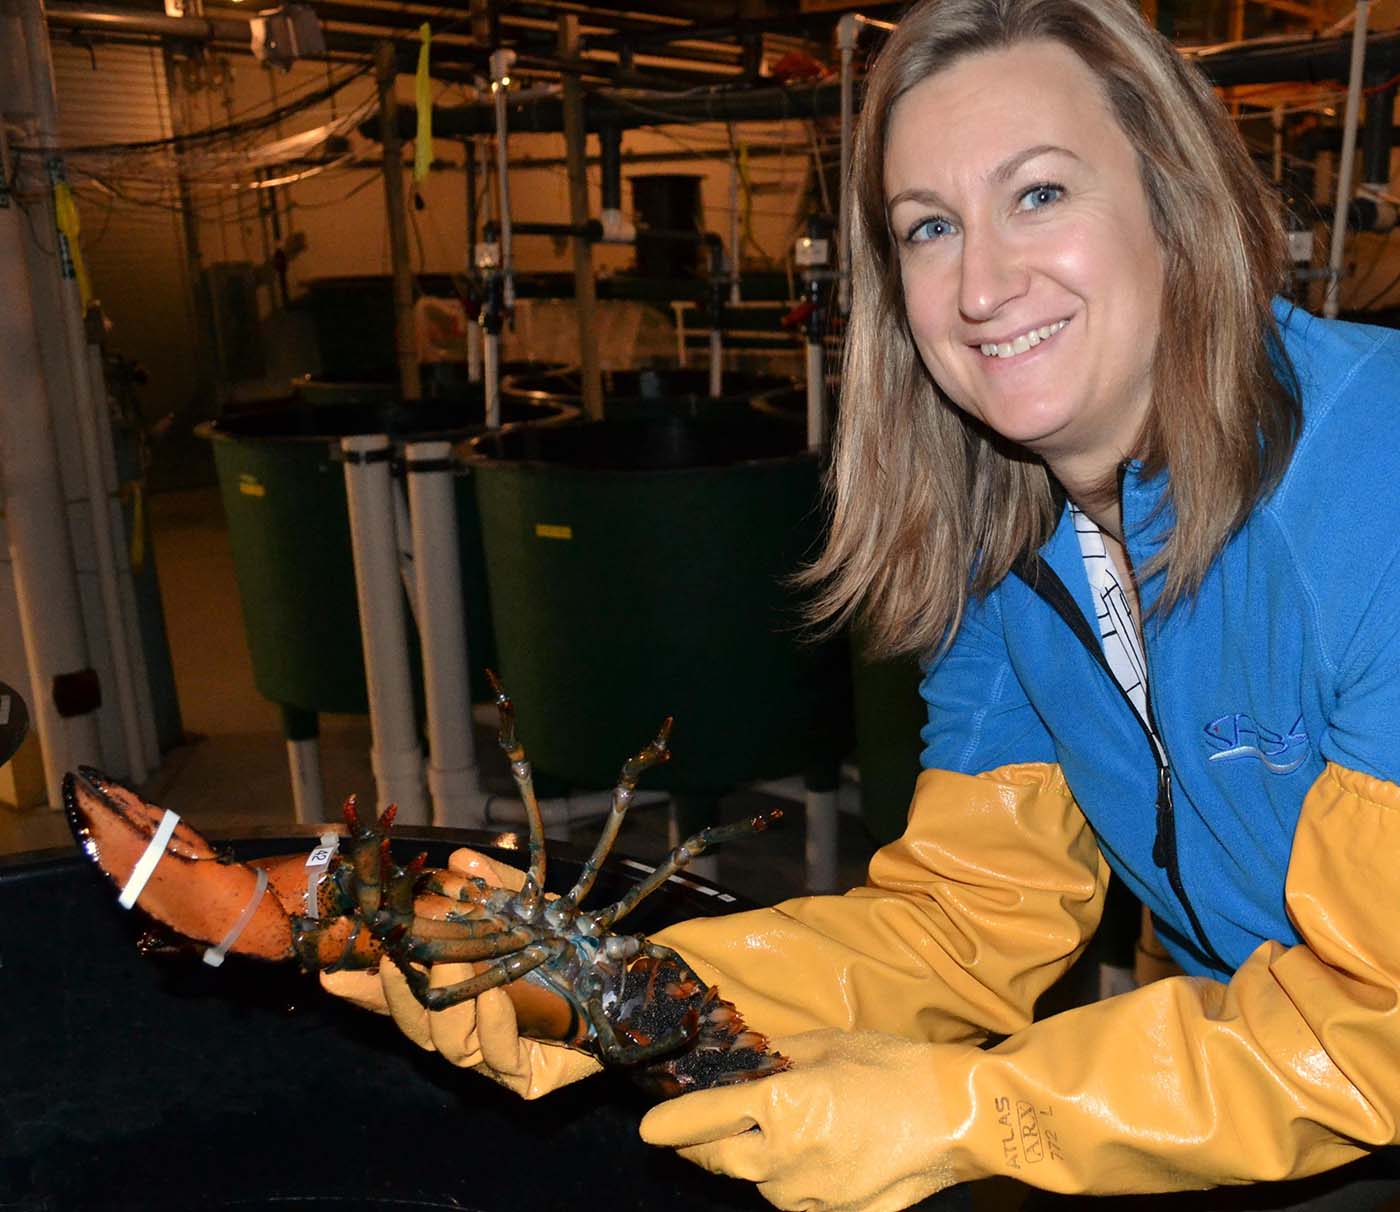 Scientist image. Photo credit: Fisheries and Oceans Canada (DFO).